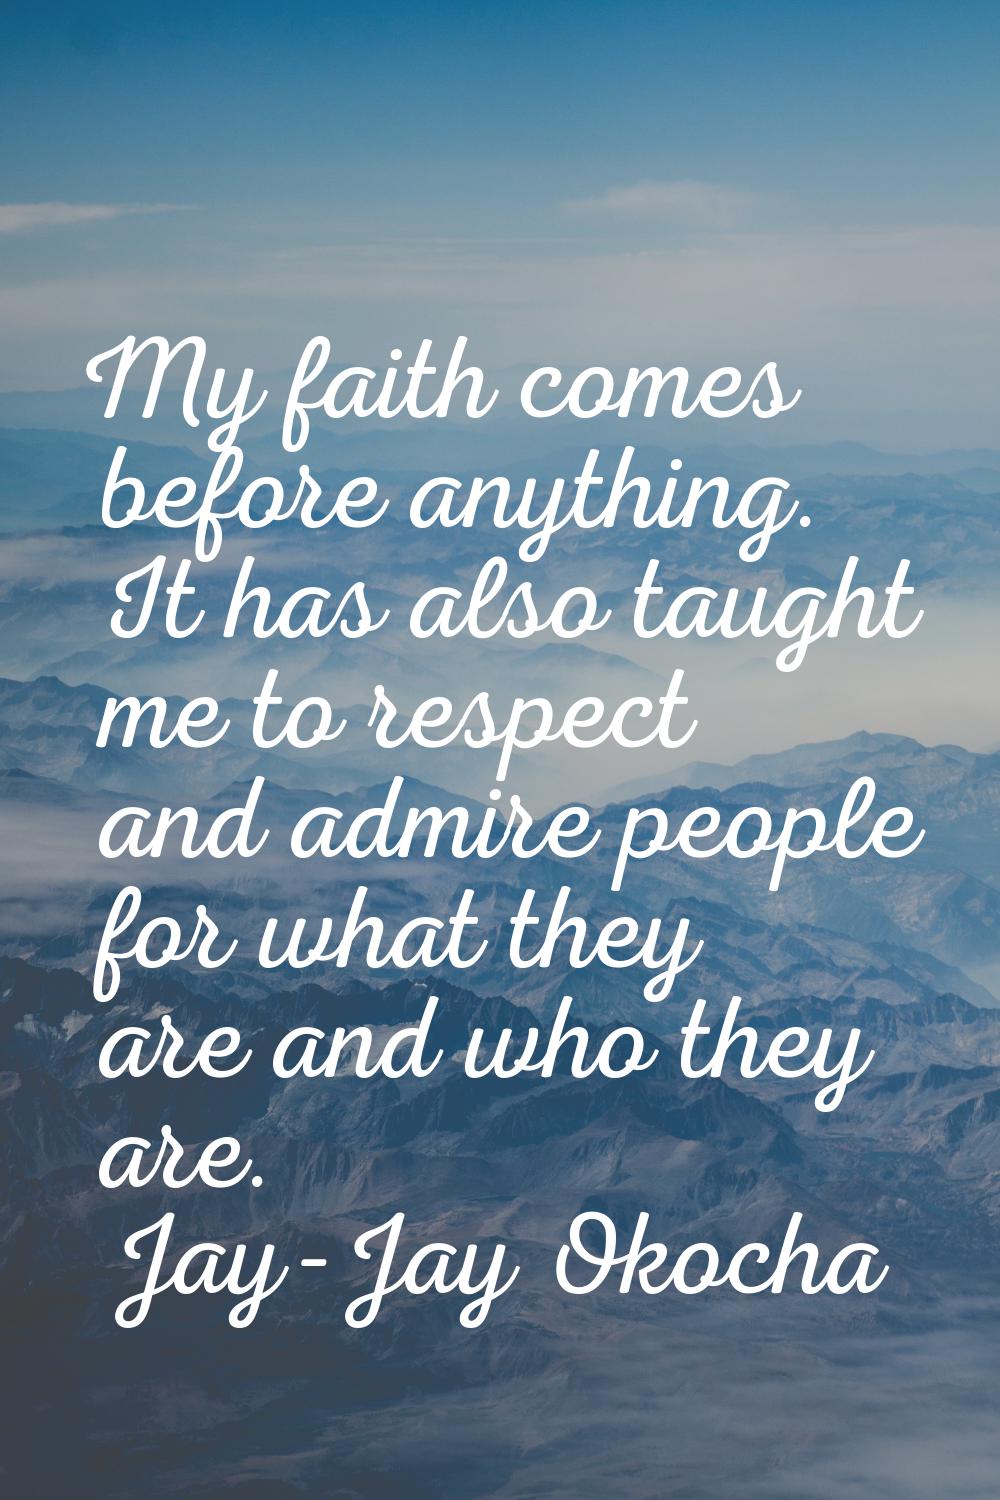 My faith comes before anything. It has also taught me to respect and admire people for what they ar